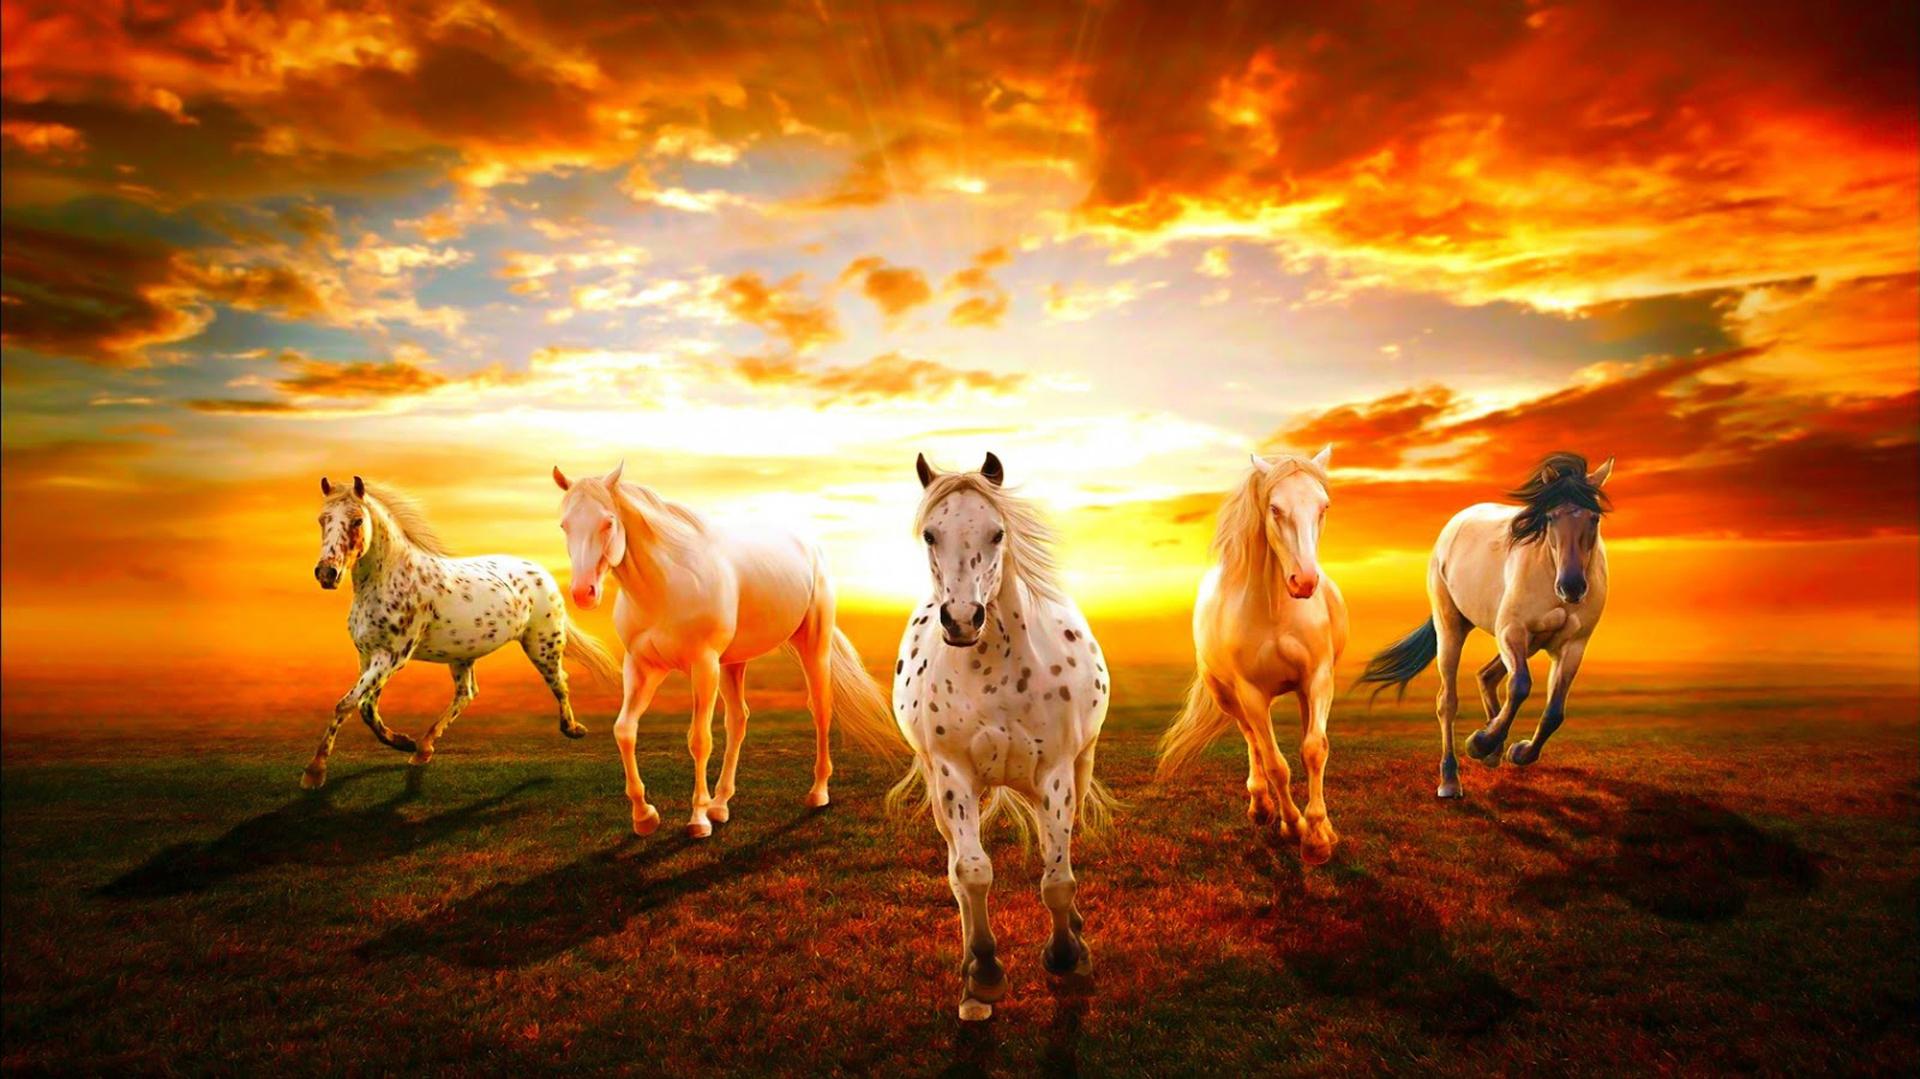 A Group Of Wild Horses Racing At Sunset